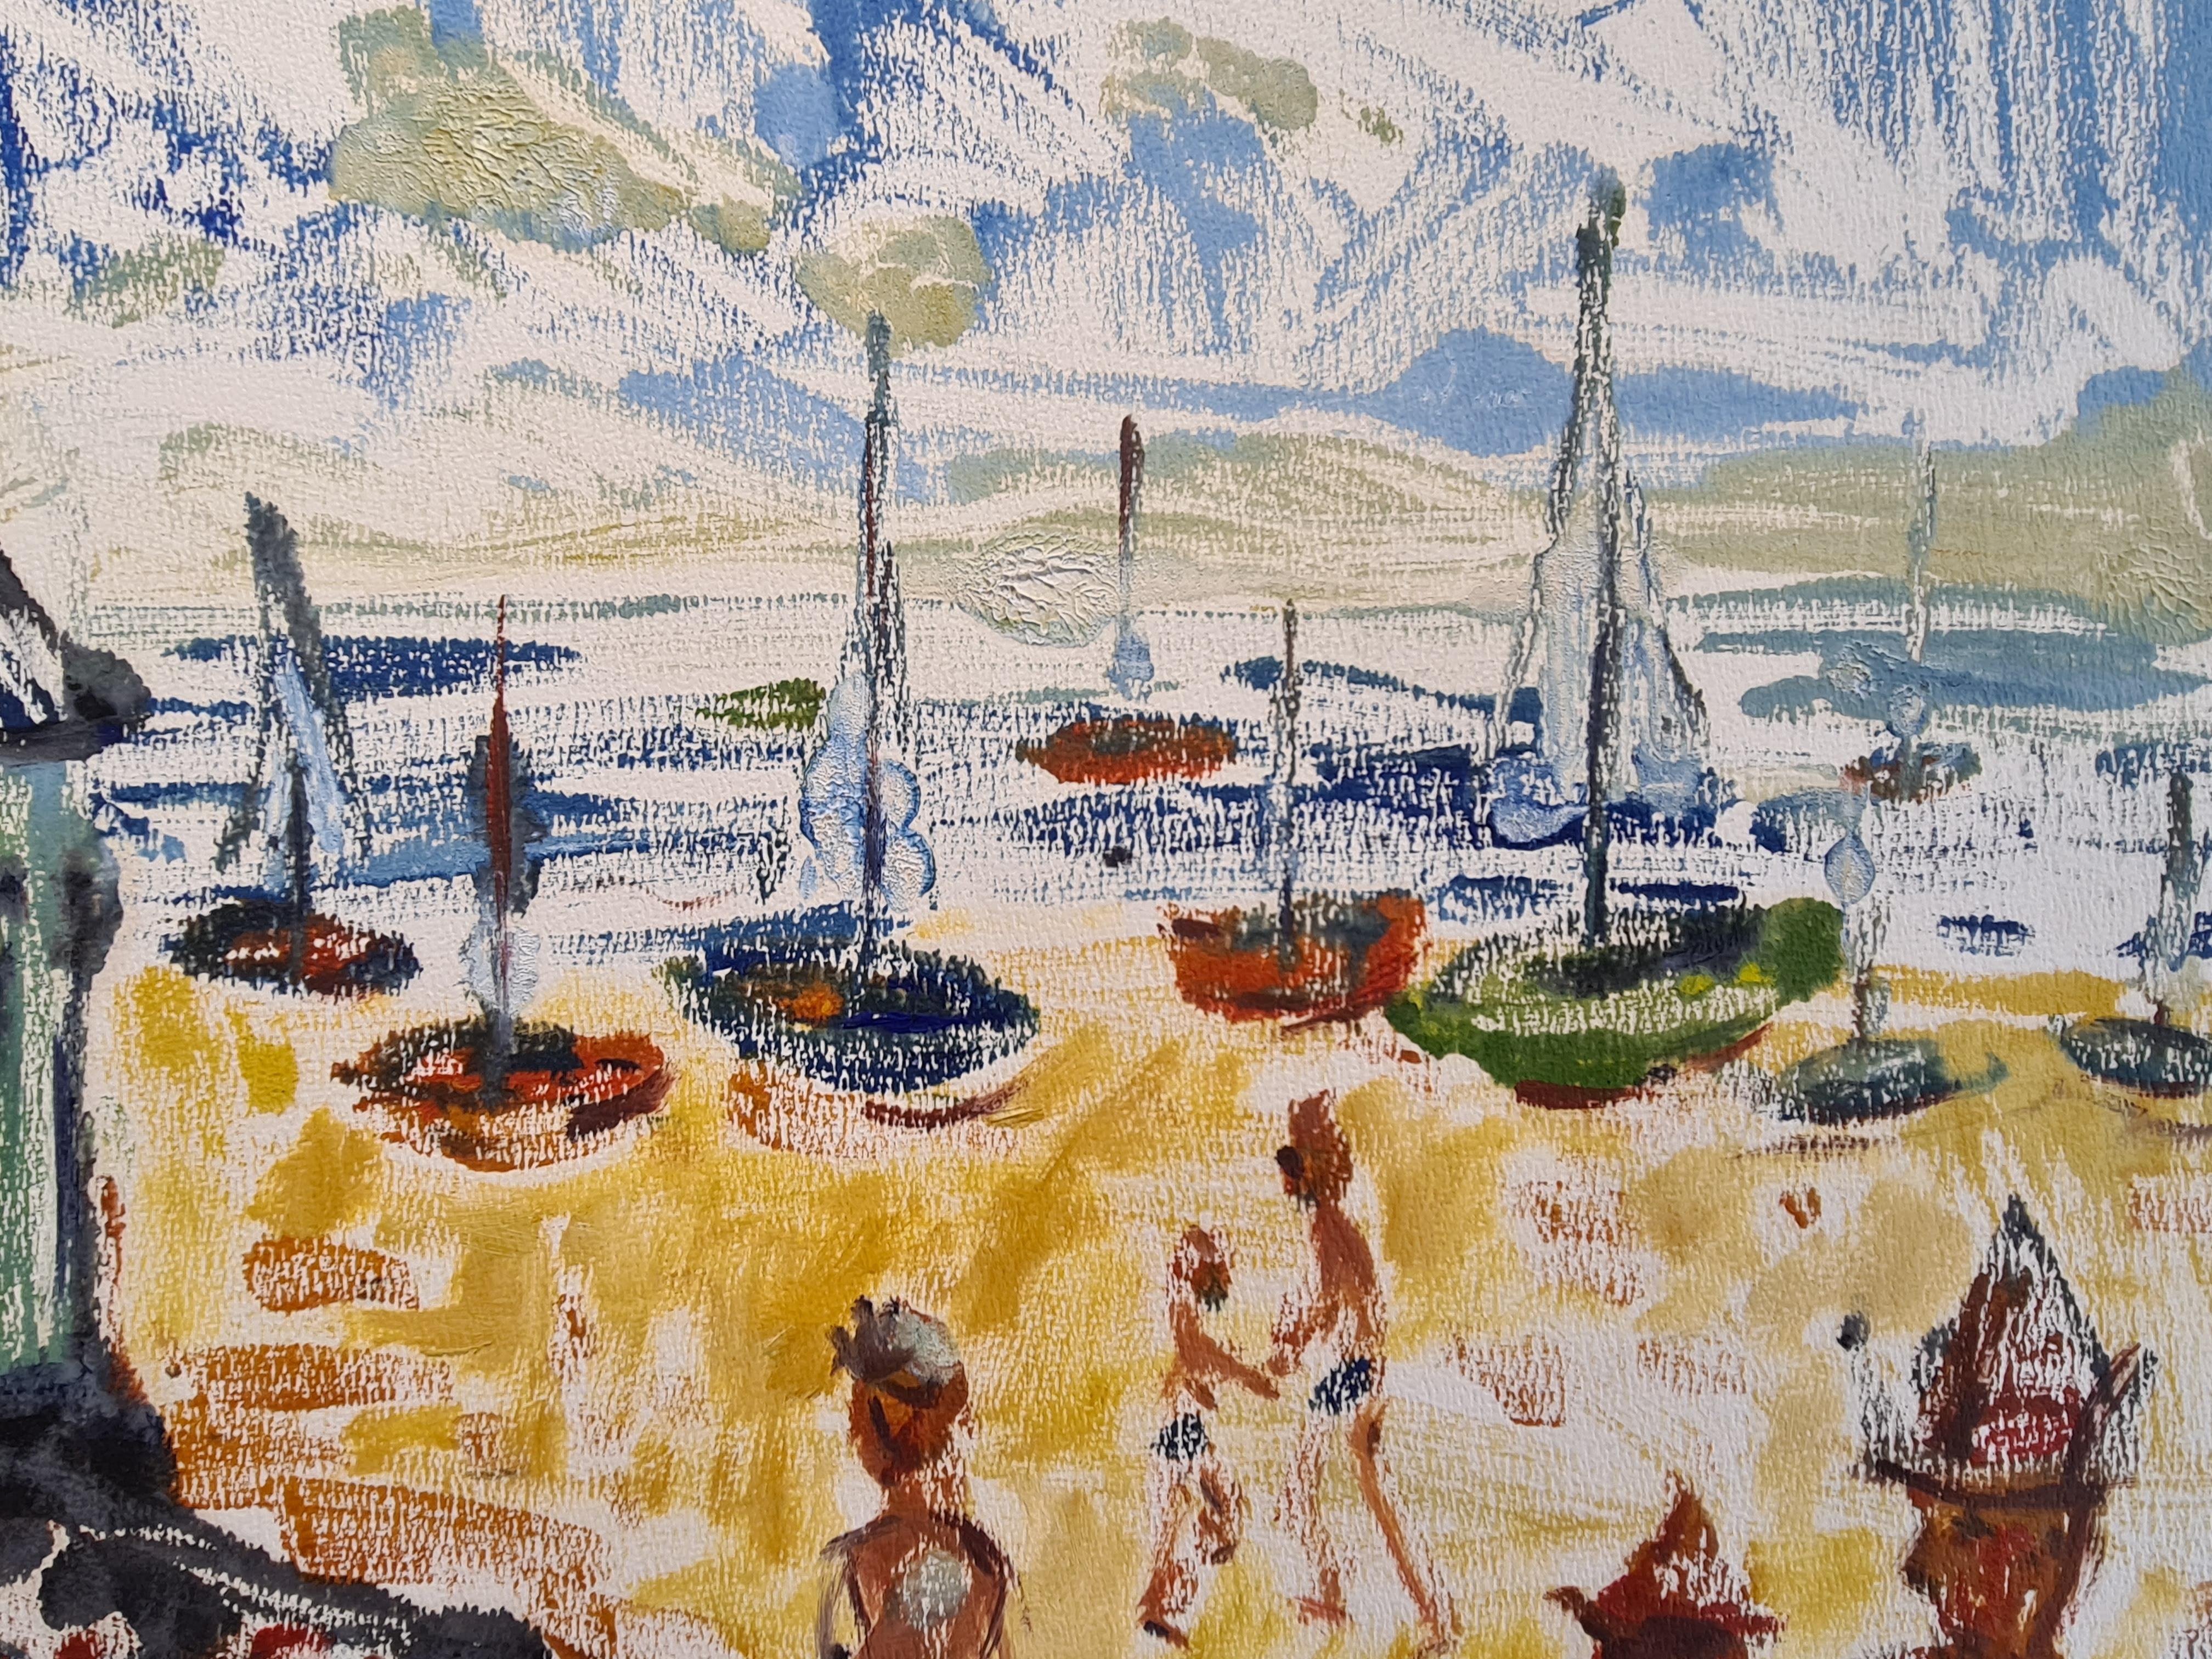 French 1970's still life gouache on paper painted on the Cote d'Azur, South of France by Belgian artist André Pierard. Colourful representation of sailing boats and a beach scene, in custom wood frame.

André Pierard had a second home near Cotignac